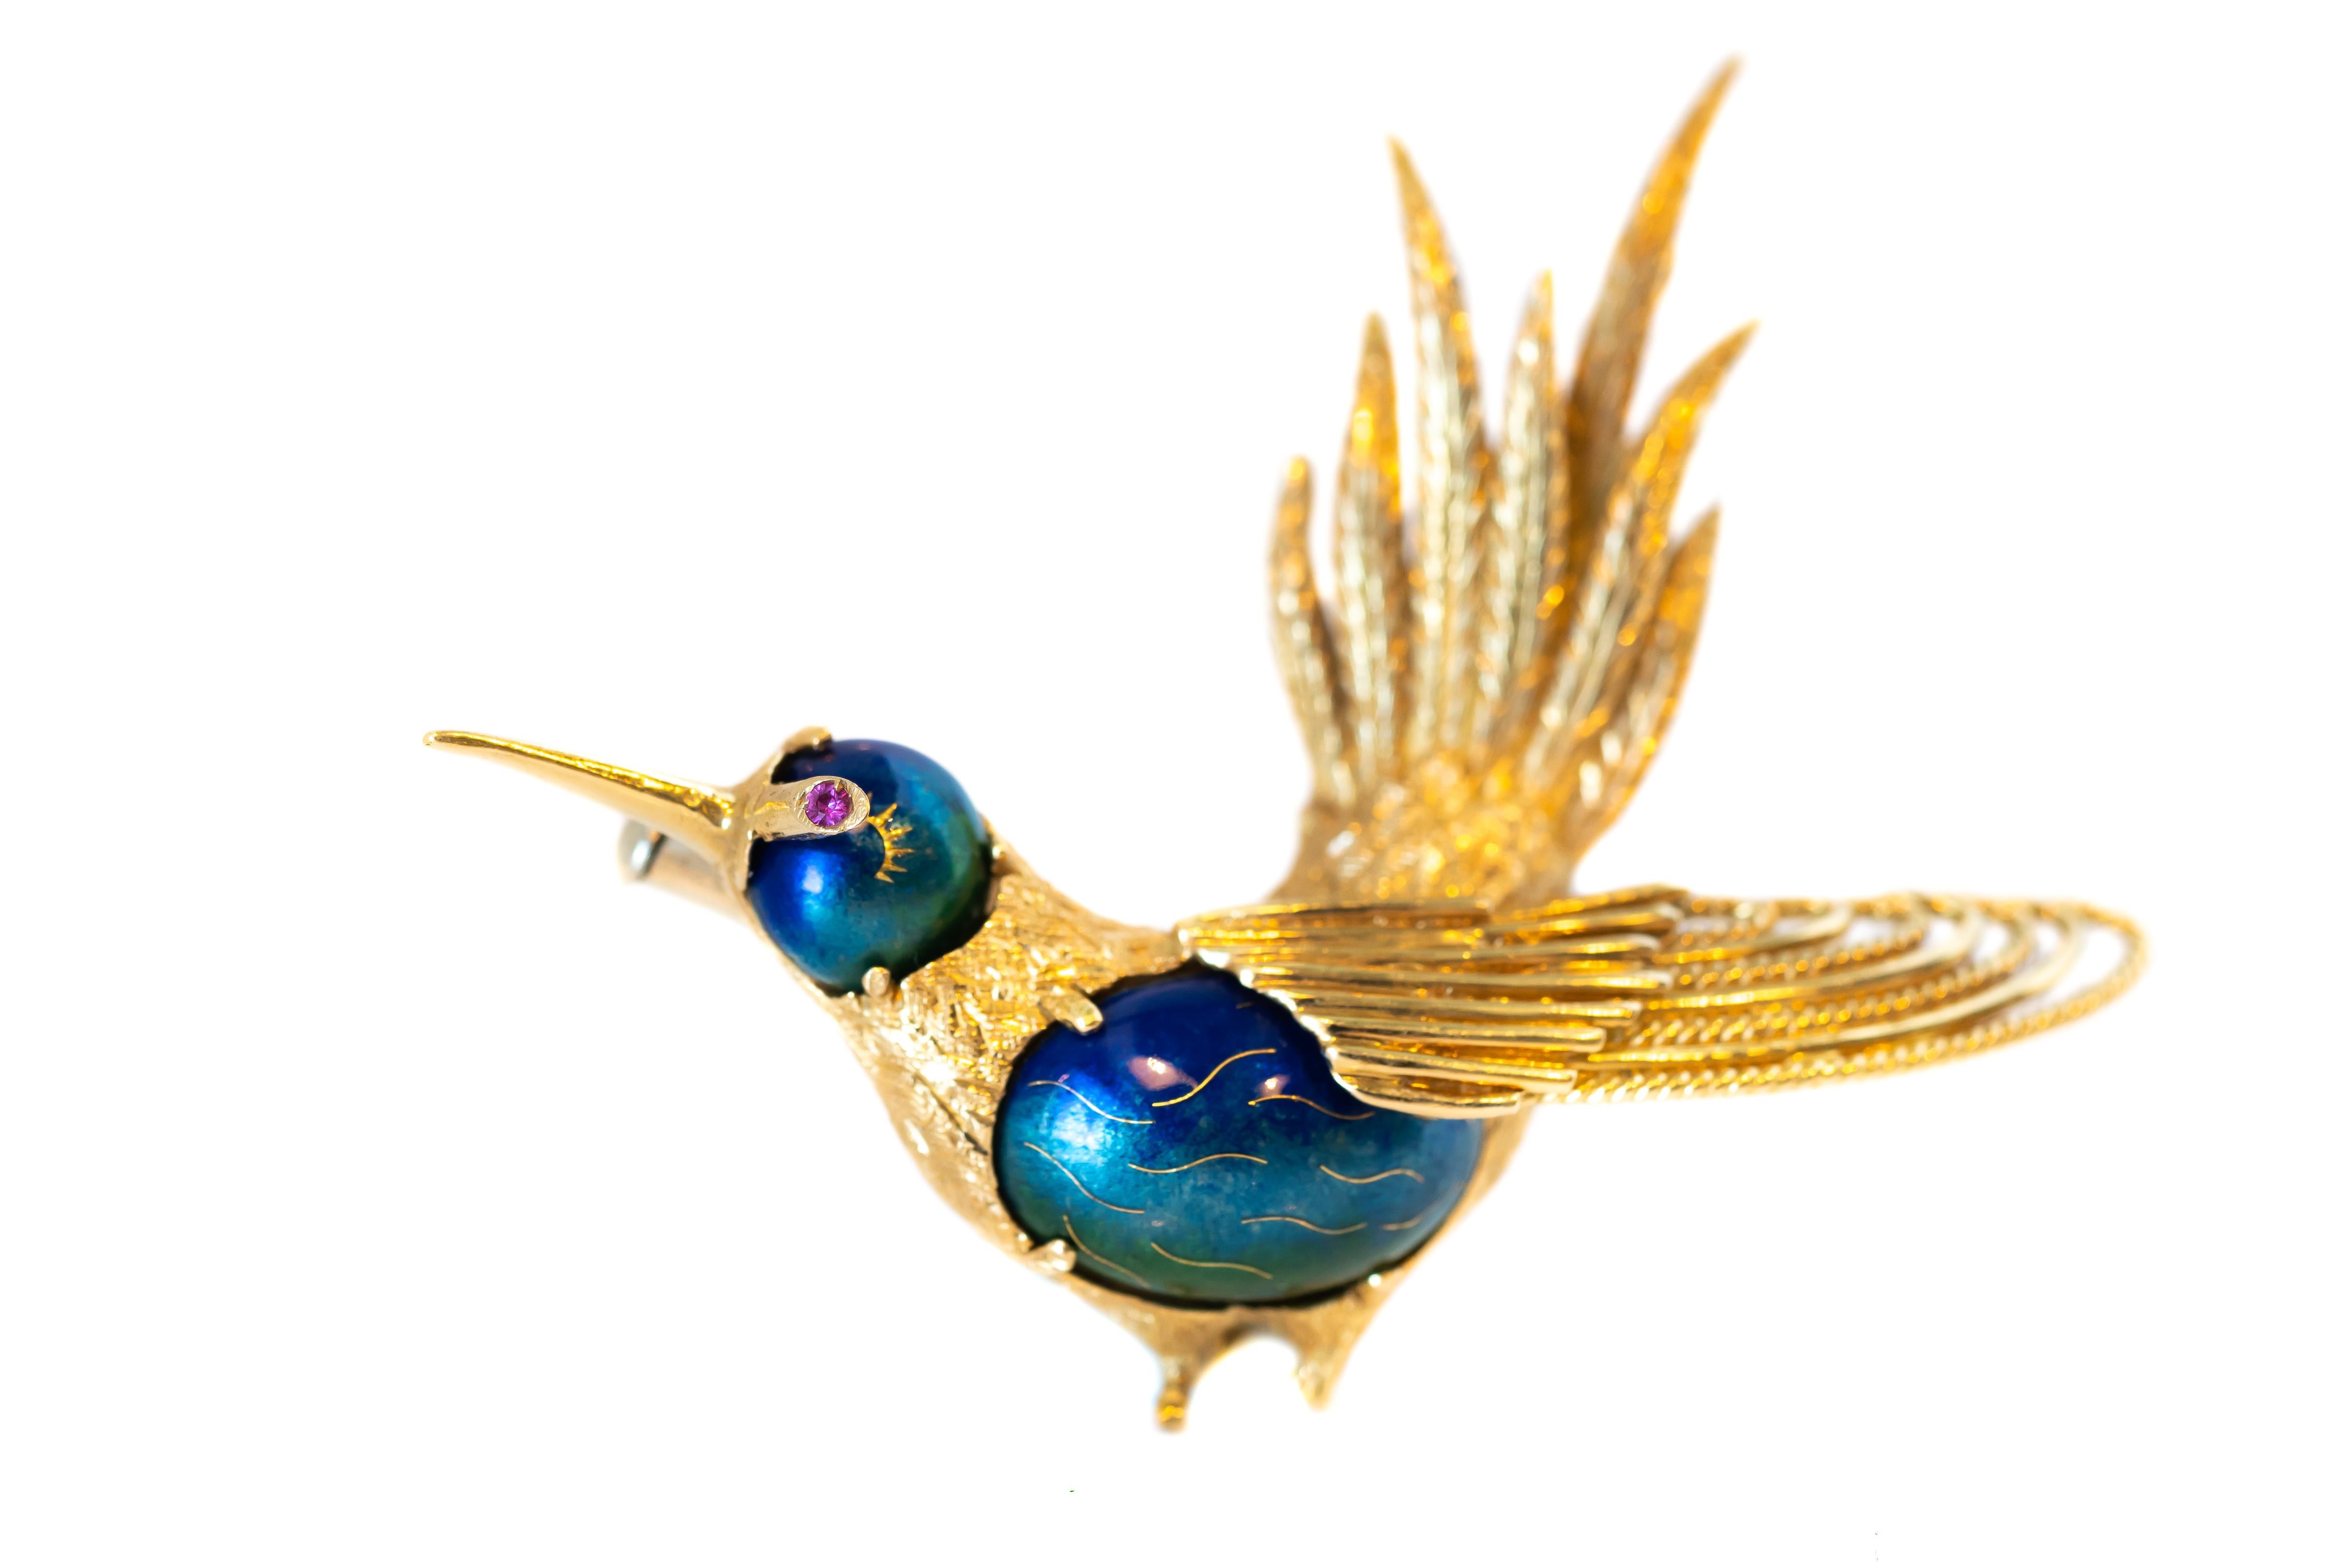 18 Karat Yellow Gold Hummingbird Pin from the 1950s!
This stunning brooch is made in Italy. 

Features include:
- Mediterranean Deep blue green enamel and red ruby eye
- richly textured gold and finely detailed feature texture
- slim Golden Beak,